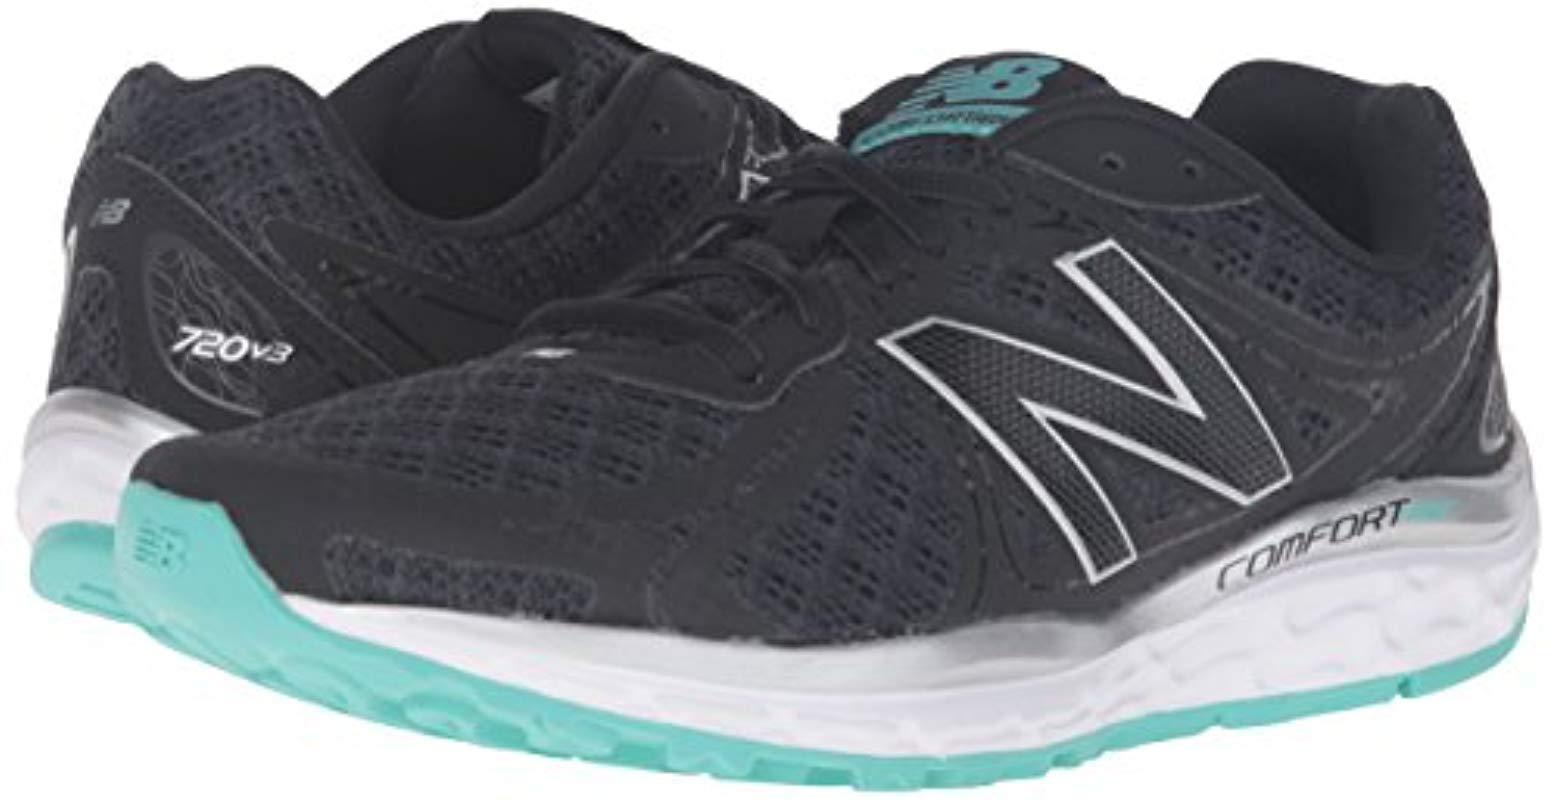 New Balance Synthetic 720v3 Comfort Ride Running Shoe in Black - Lyst